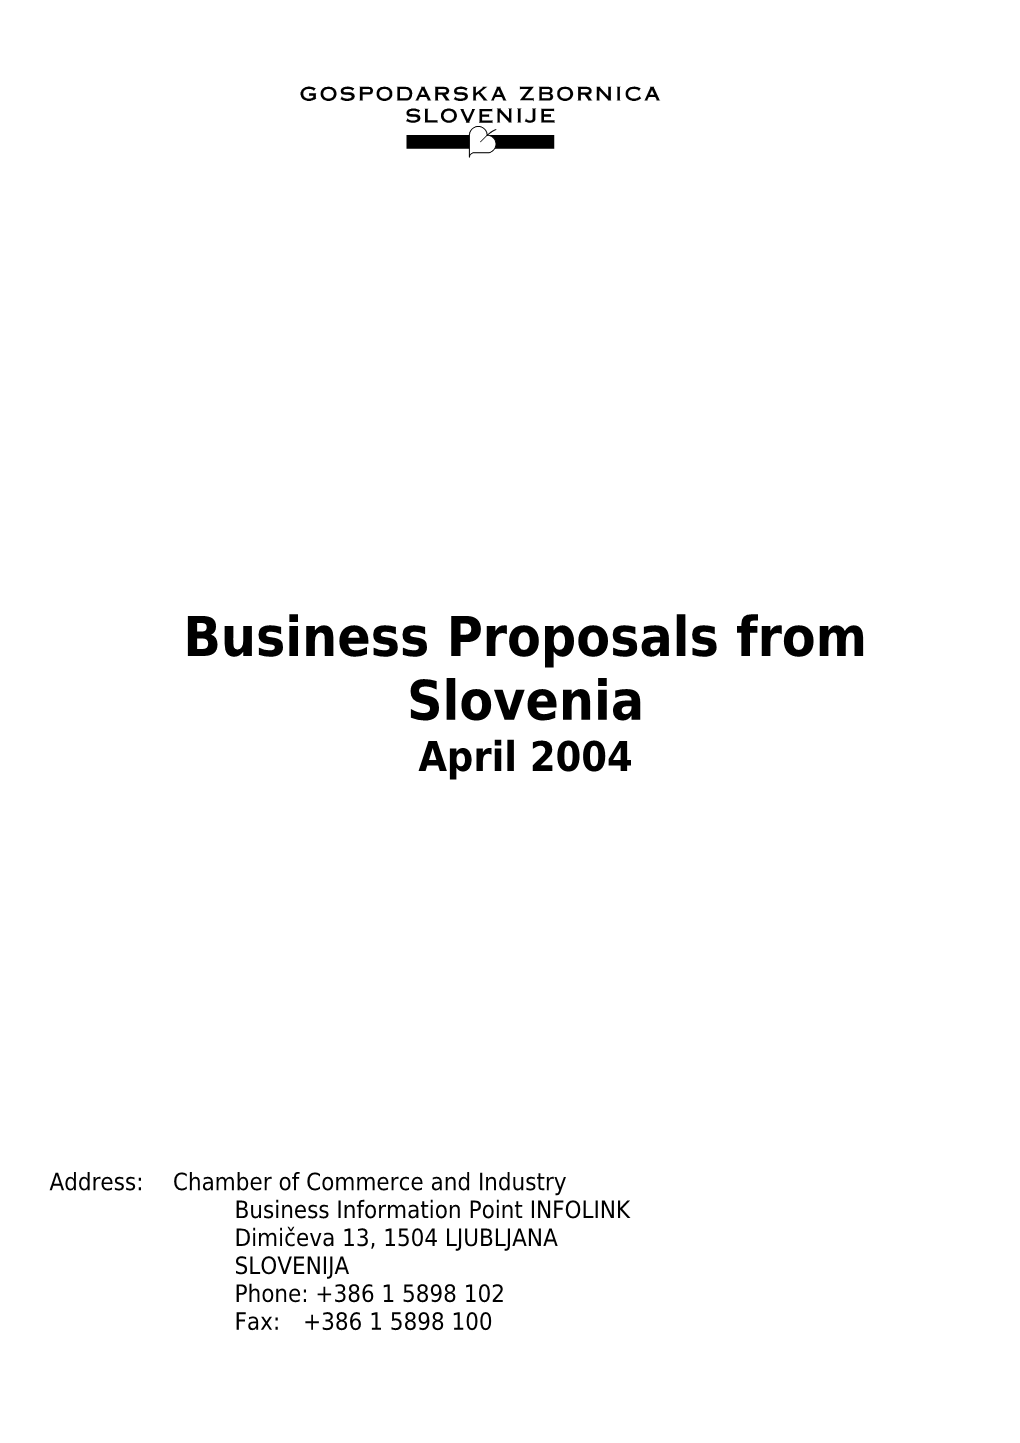 Business Proposals from Slovenia